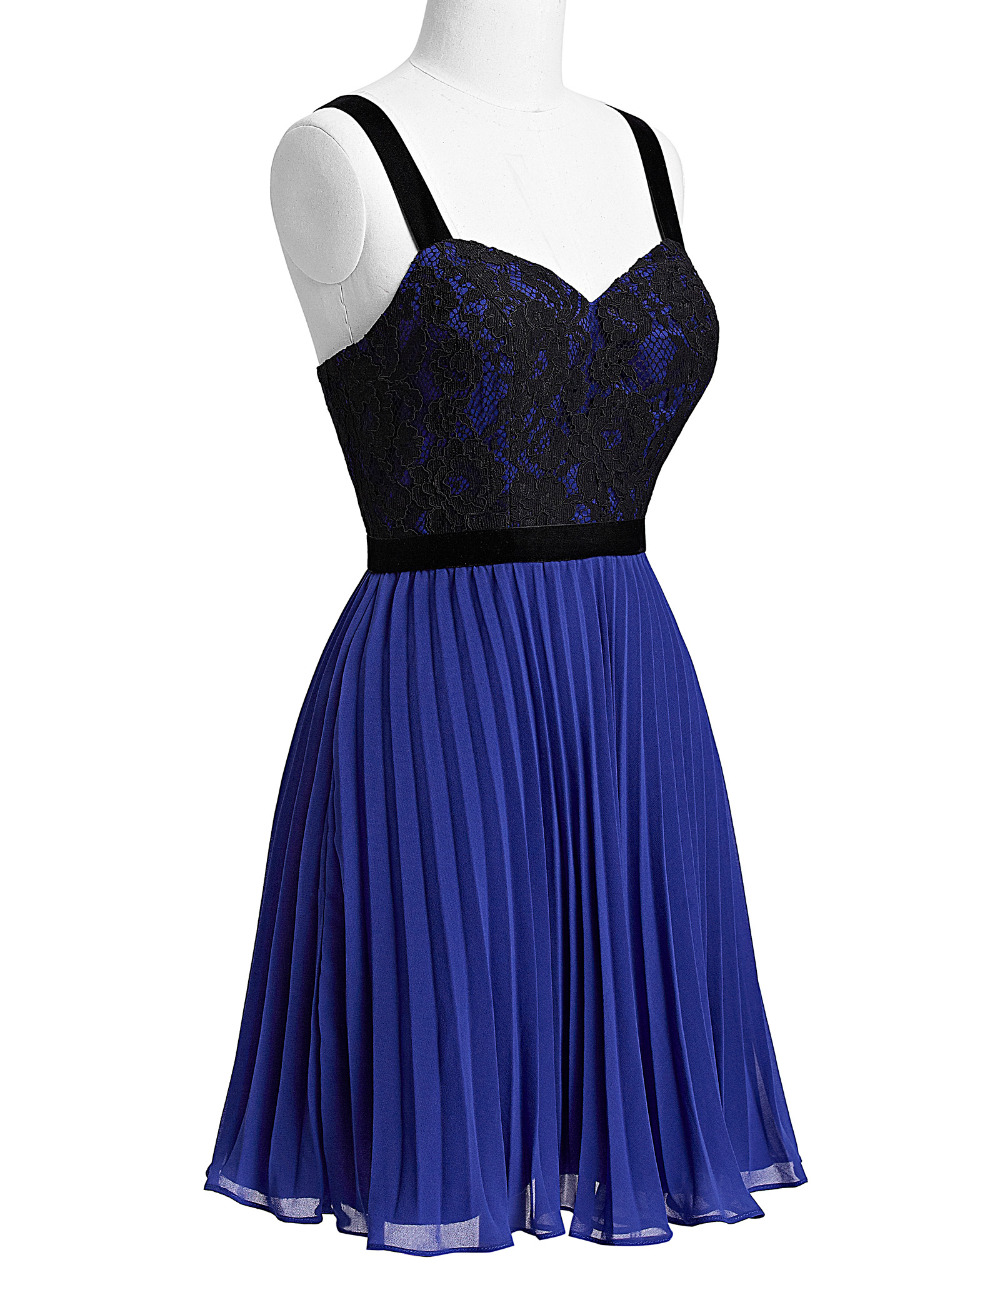 Charming Spaghetti Straps Royal Blue Homecoming Dresses With Lace Bodice,short Chiffon Prom Dresses 2016